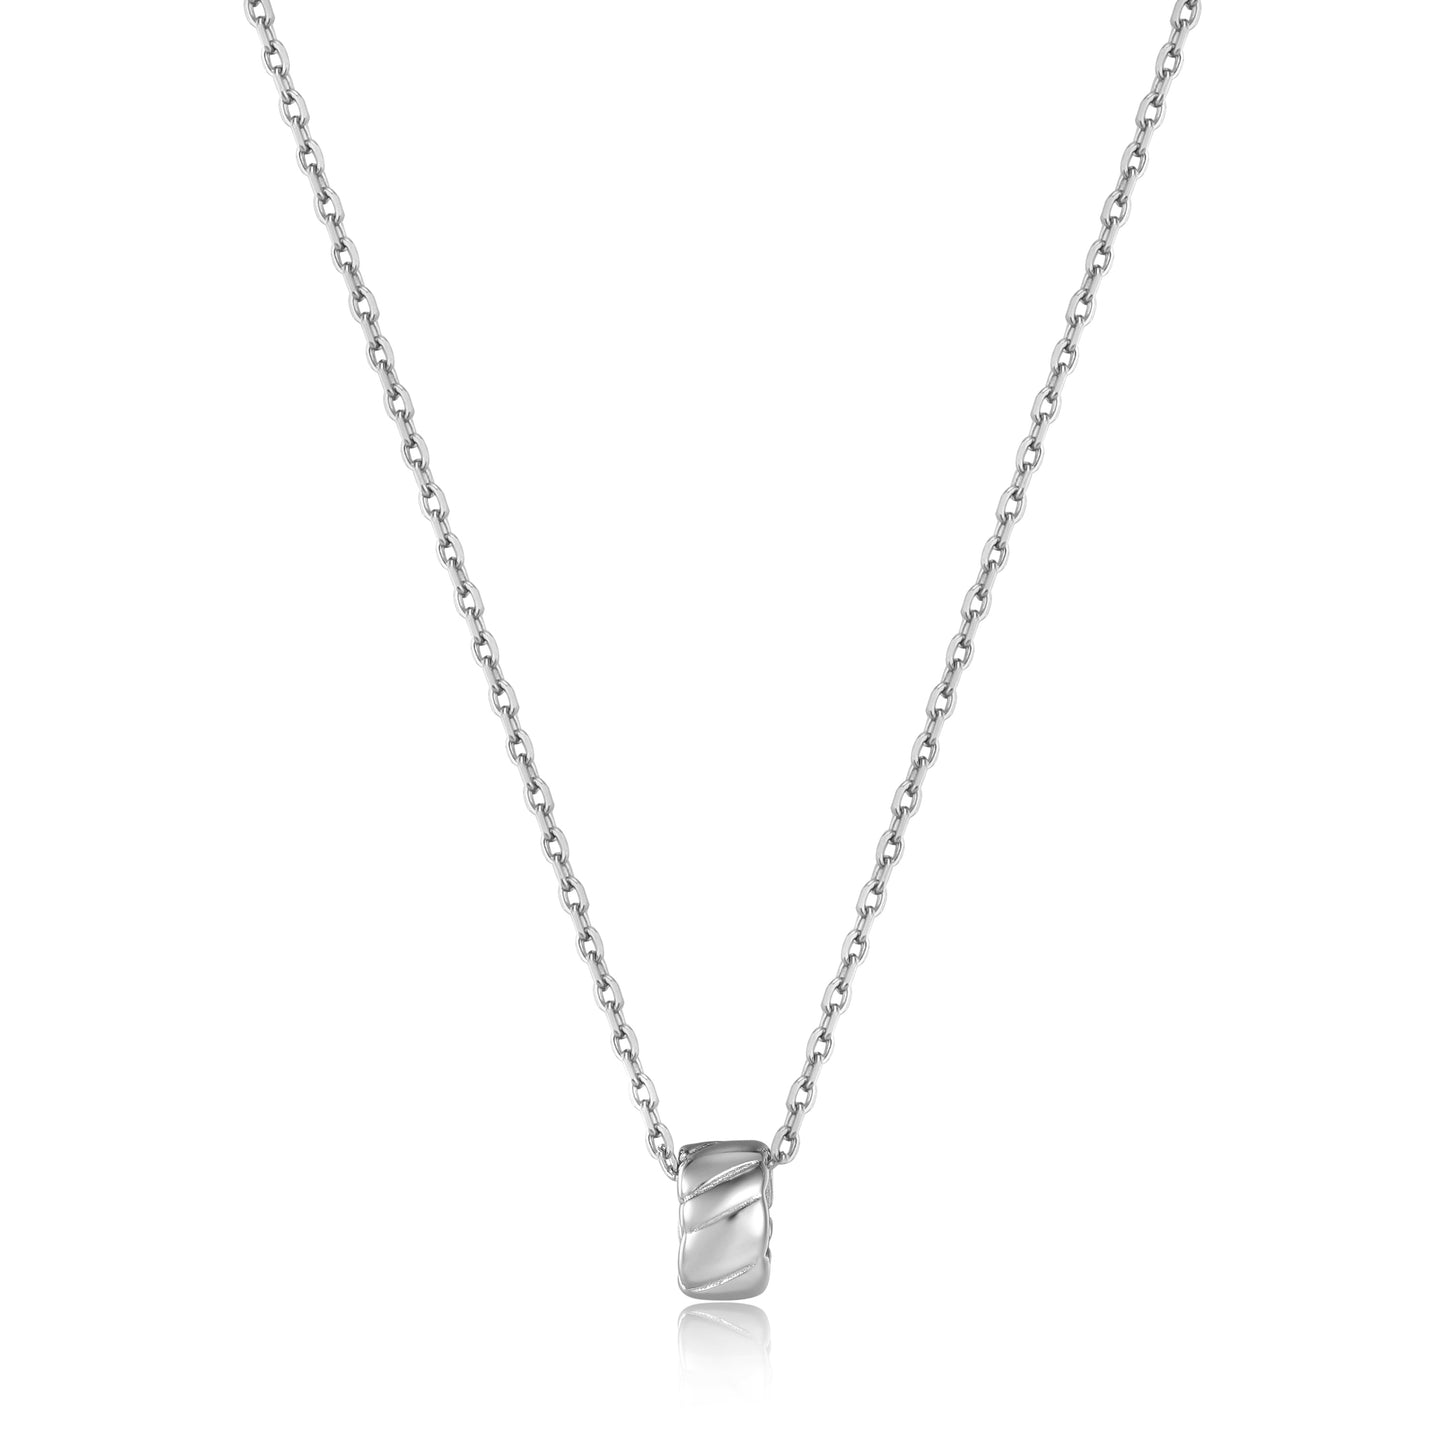 Ania Haie Silver Smooth Twist Pendant Necklace